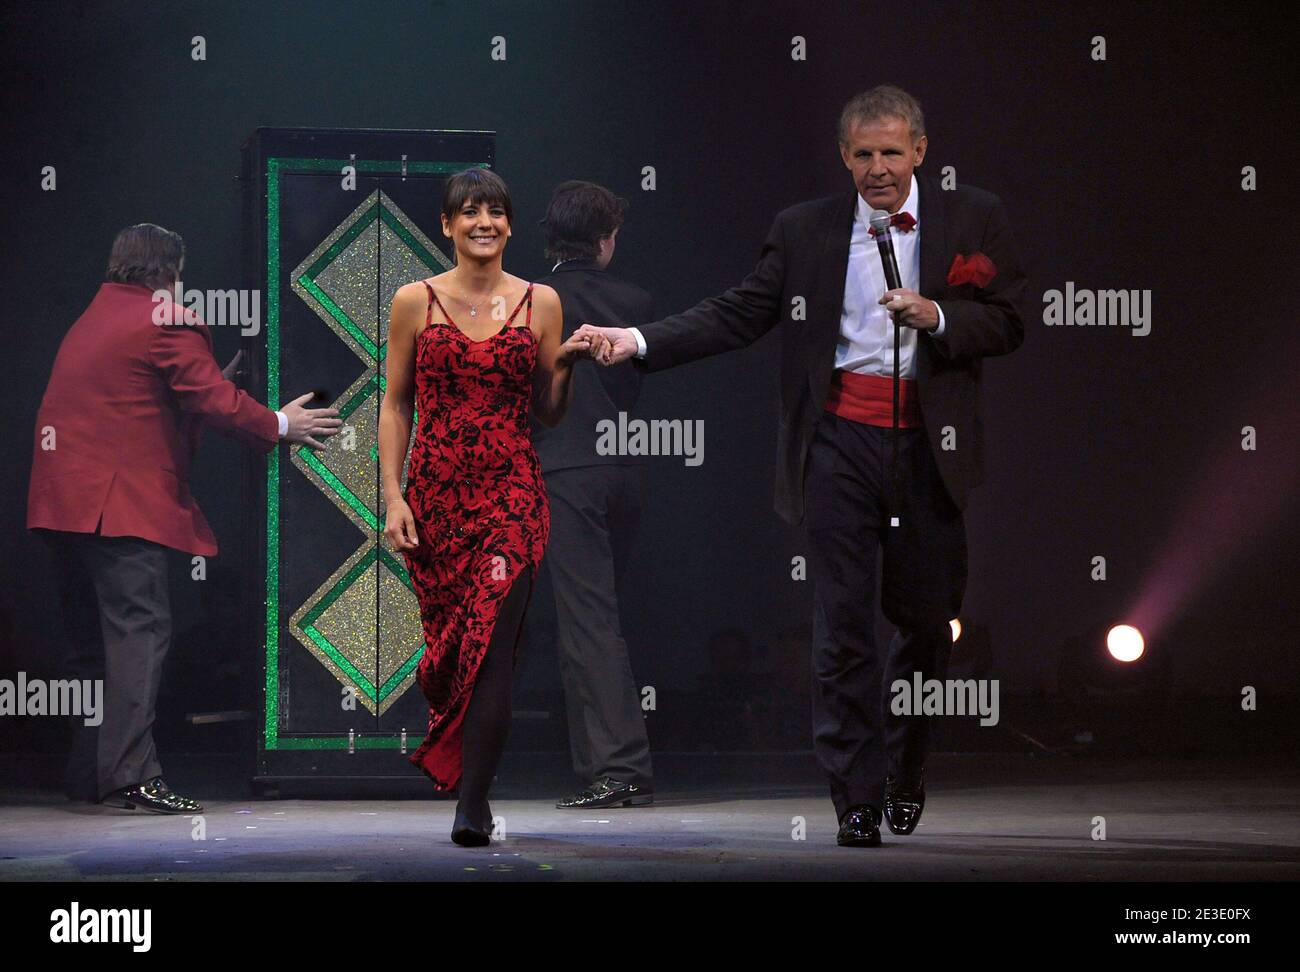 Patrick Poivre d'Arvor and Estelle Denis perform during the 11th Gala De La Presse to benefit the NGO 'Action Innocence' at the Cirque Phenix in Paris, France on January 9, 2009. Photo by Giancarlo Gorassini/ABACAPRESS.COM Stock Photo